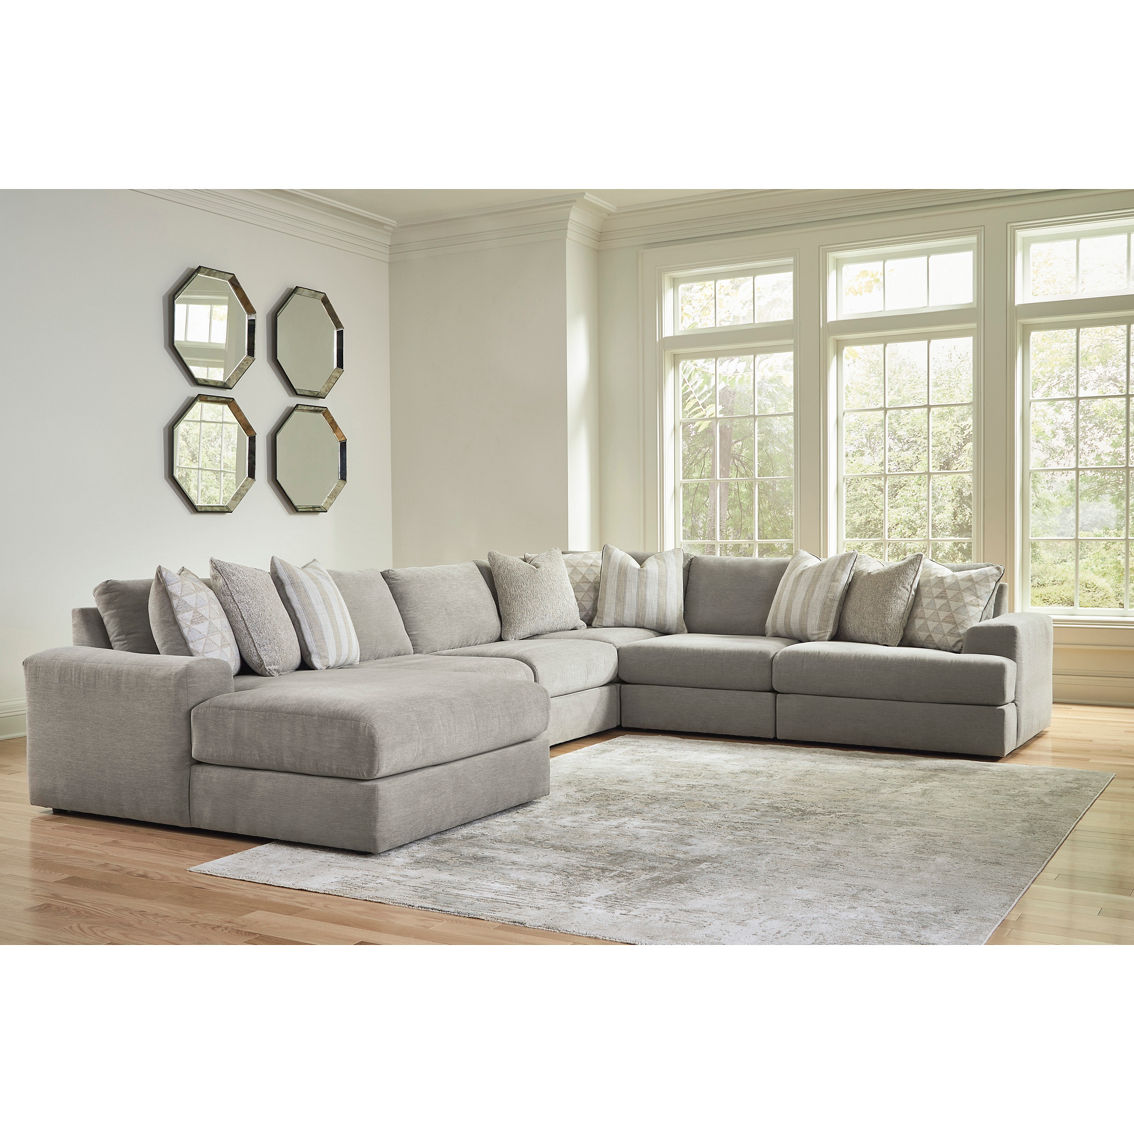 Millennium by Ashley Avaliyah 6 pc. Sectional - Image 2 of 2